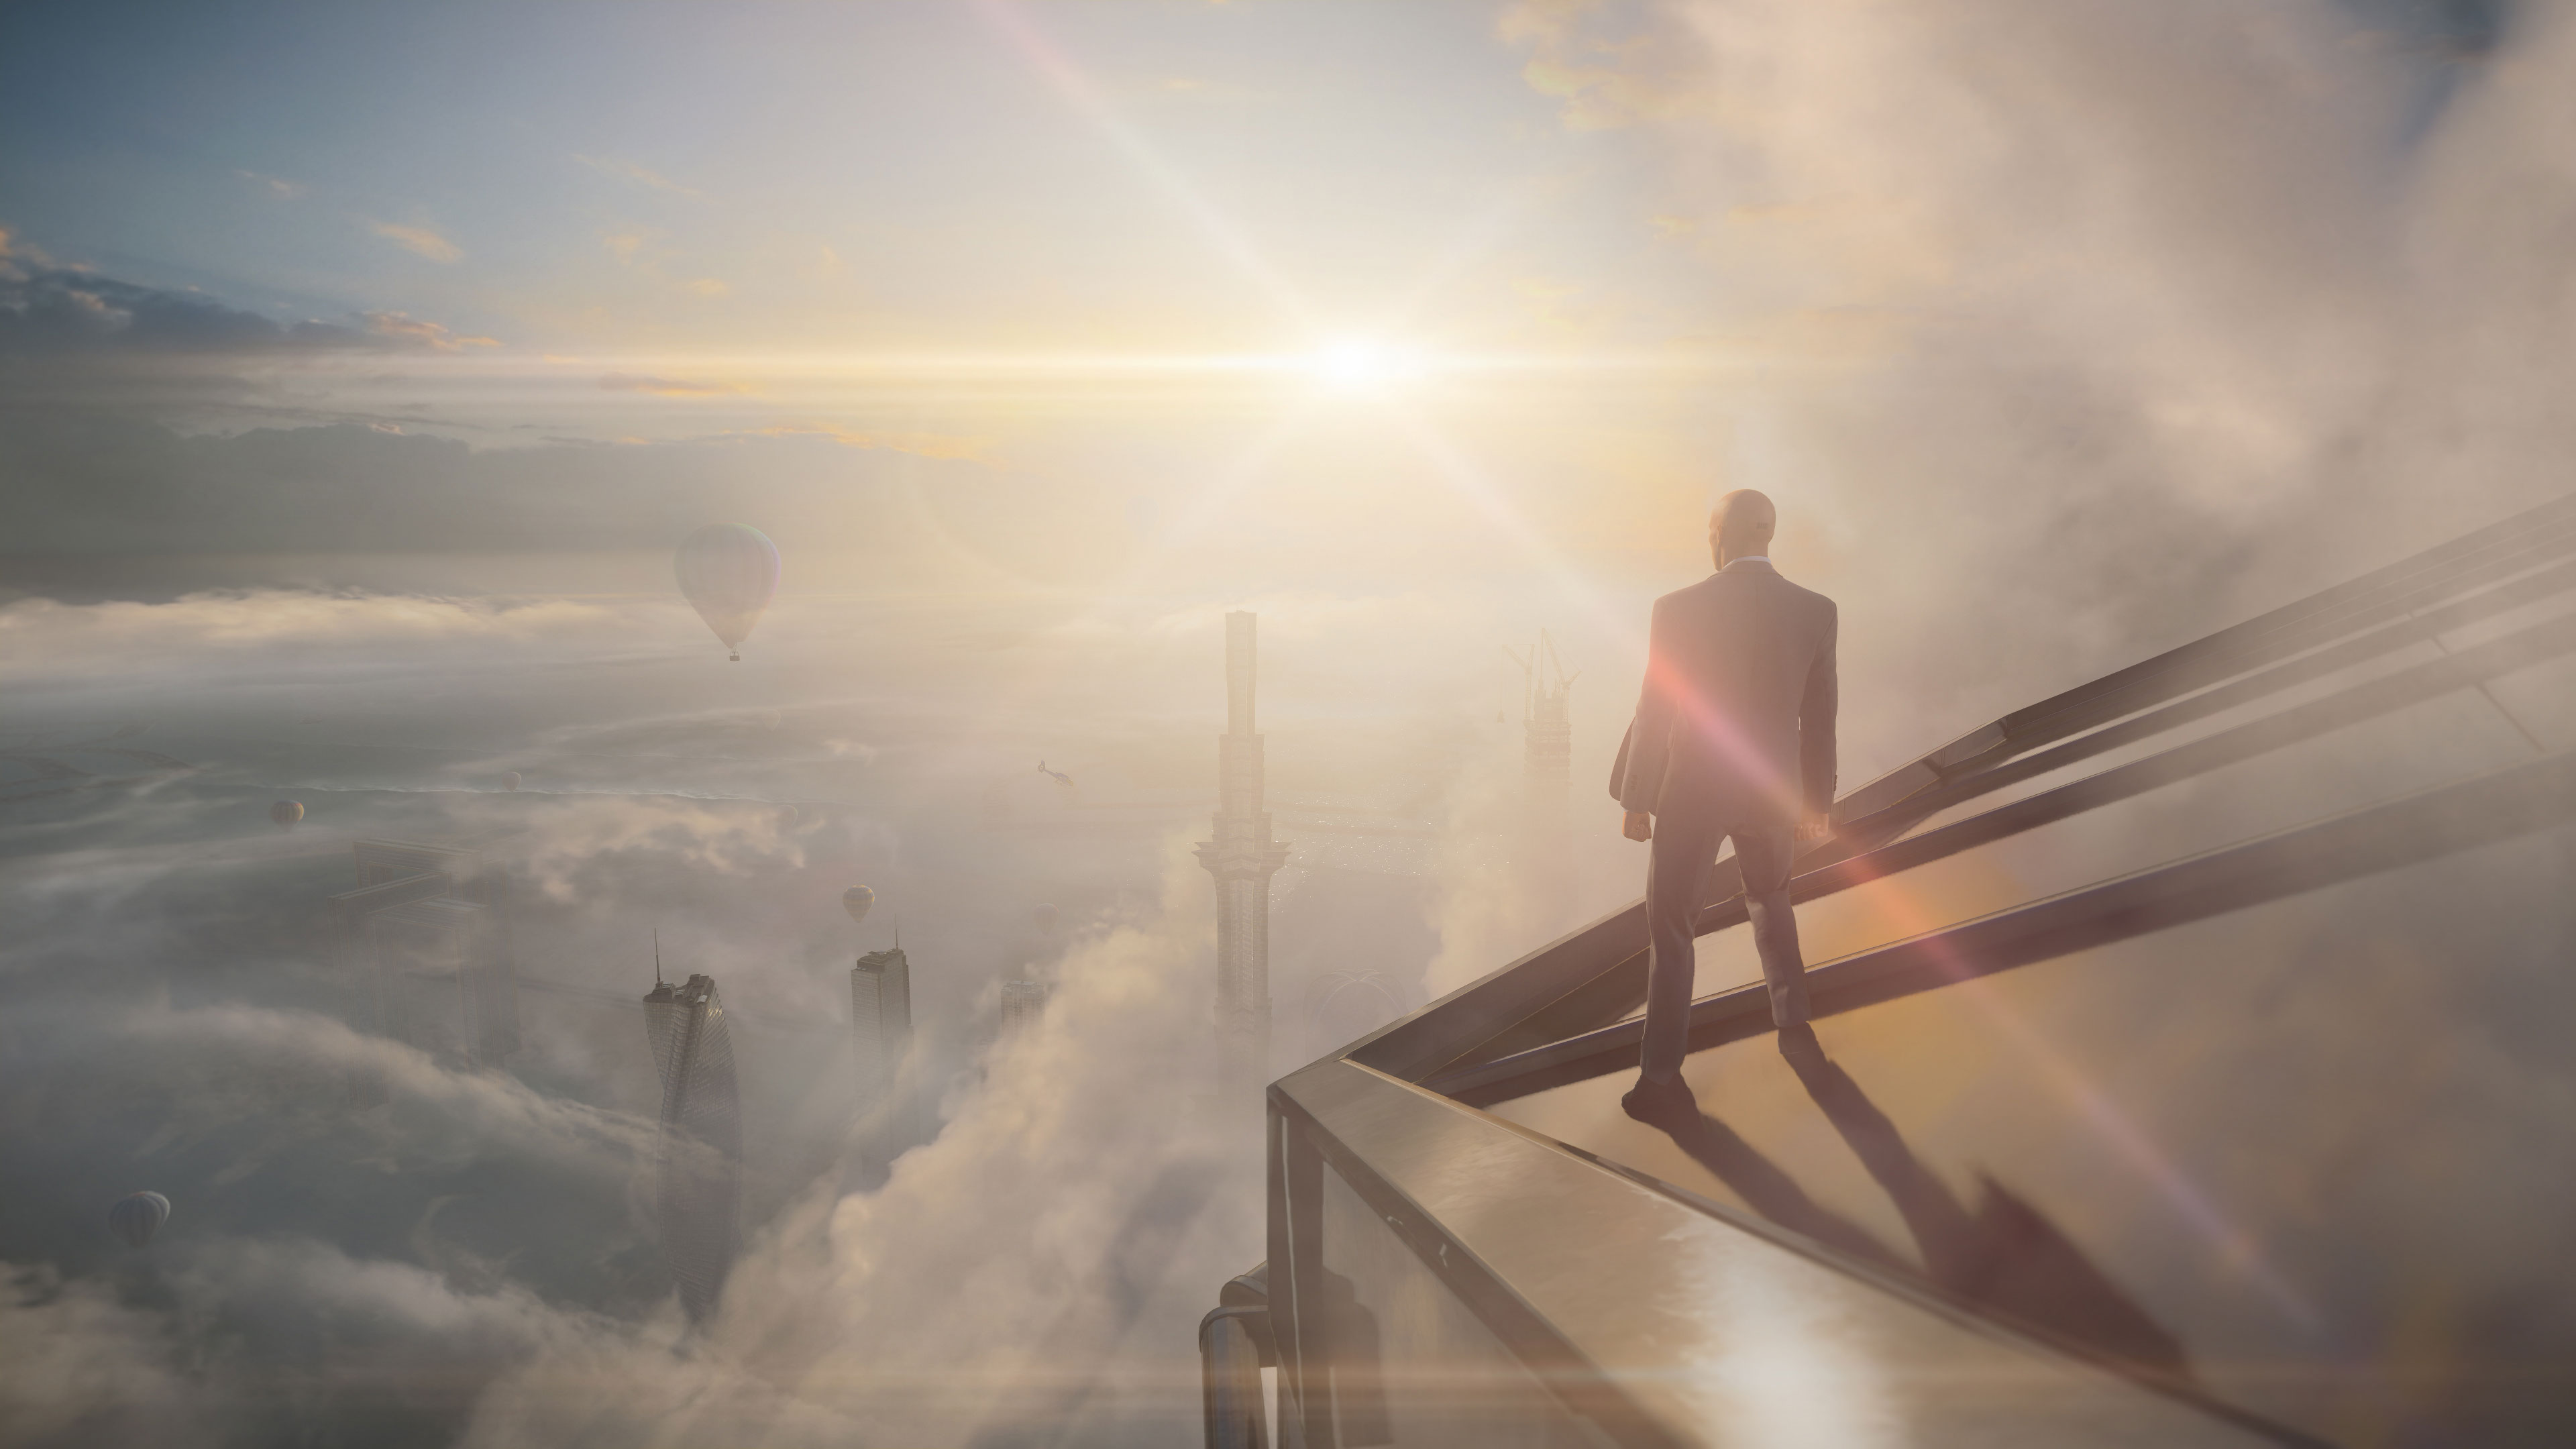 Agent 47 on top of a building overlooking the clouds